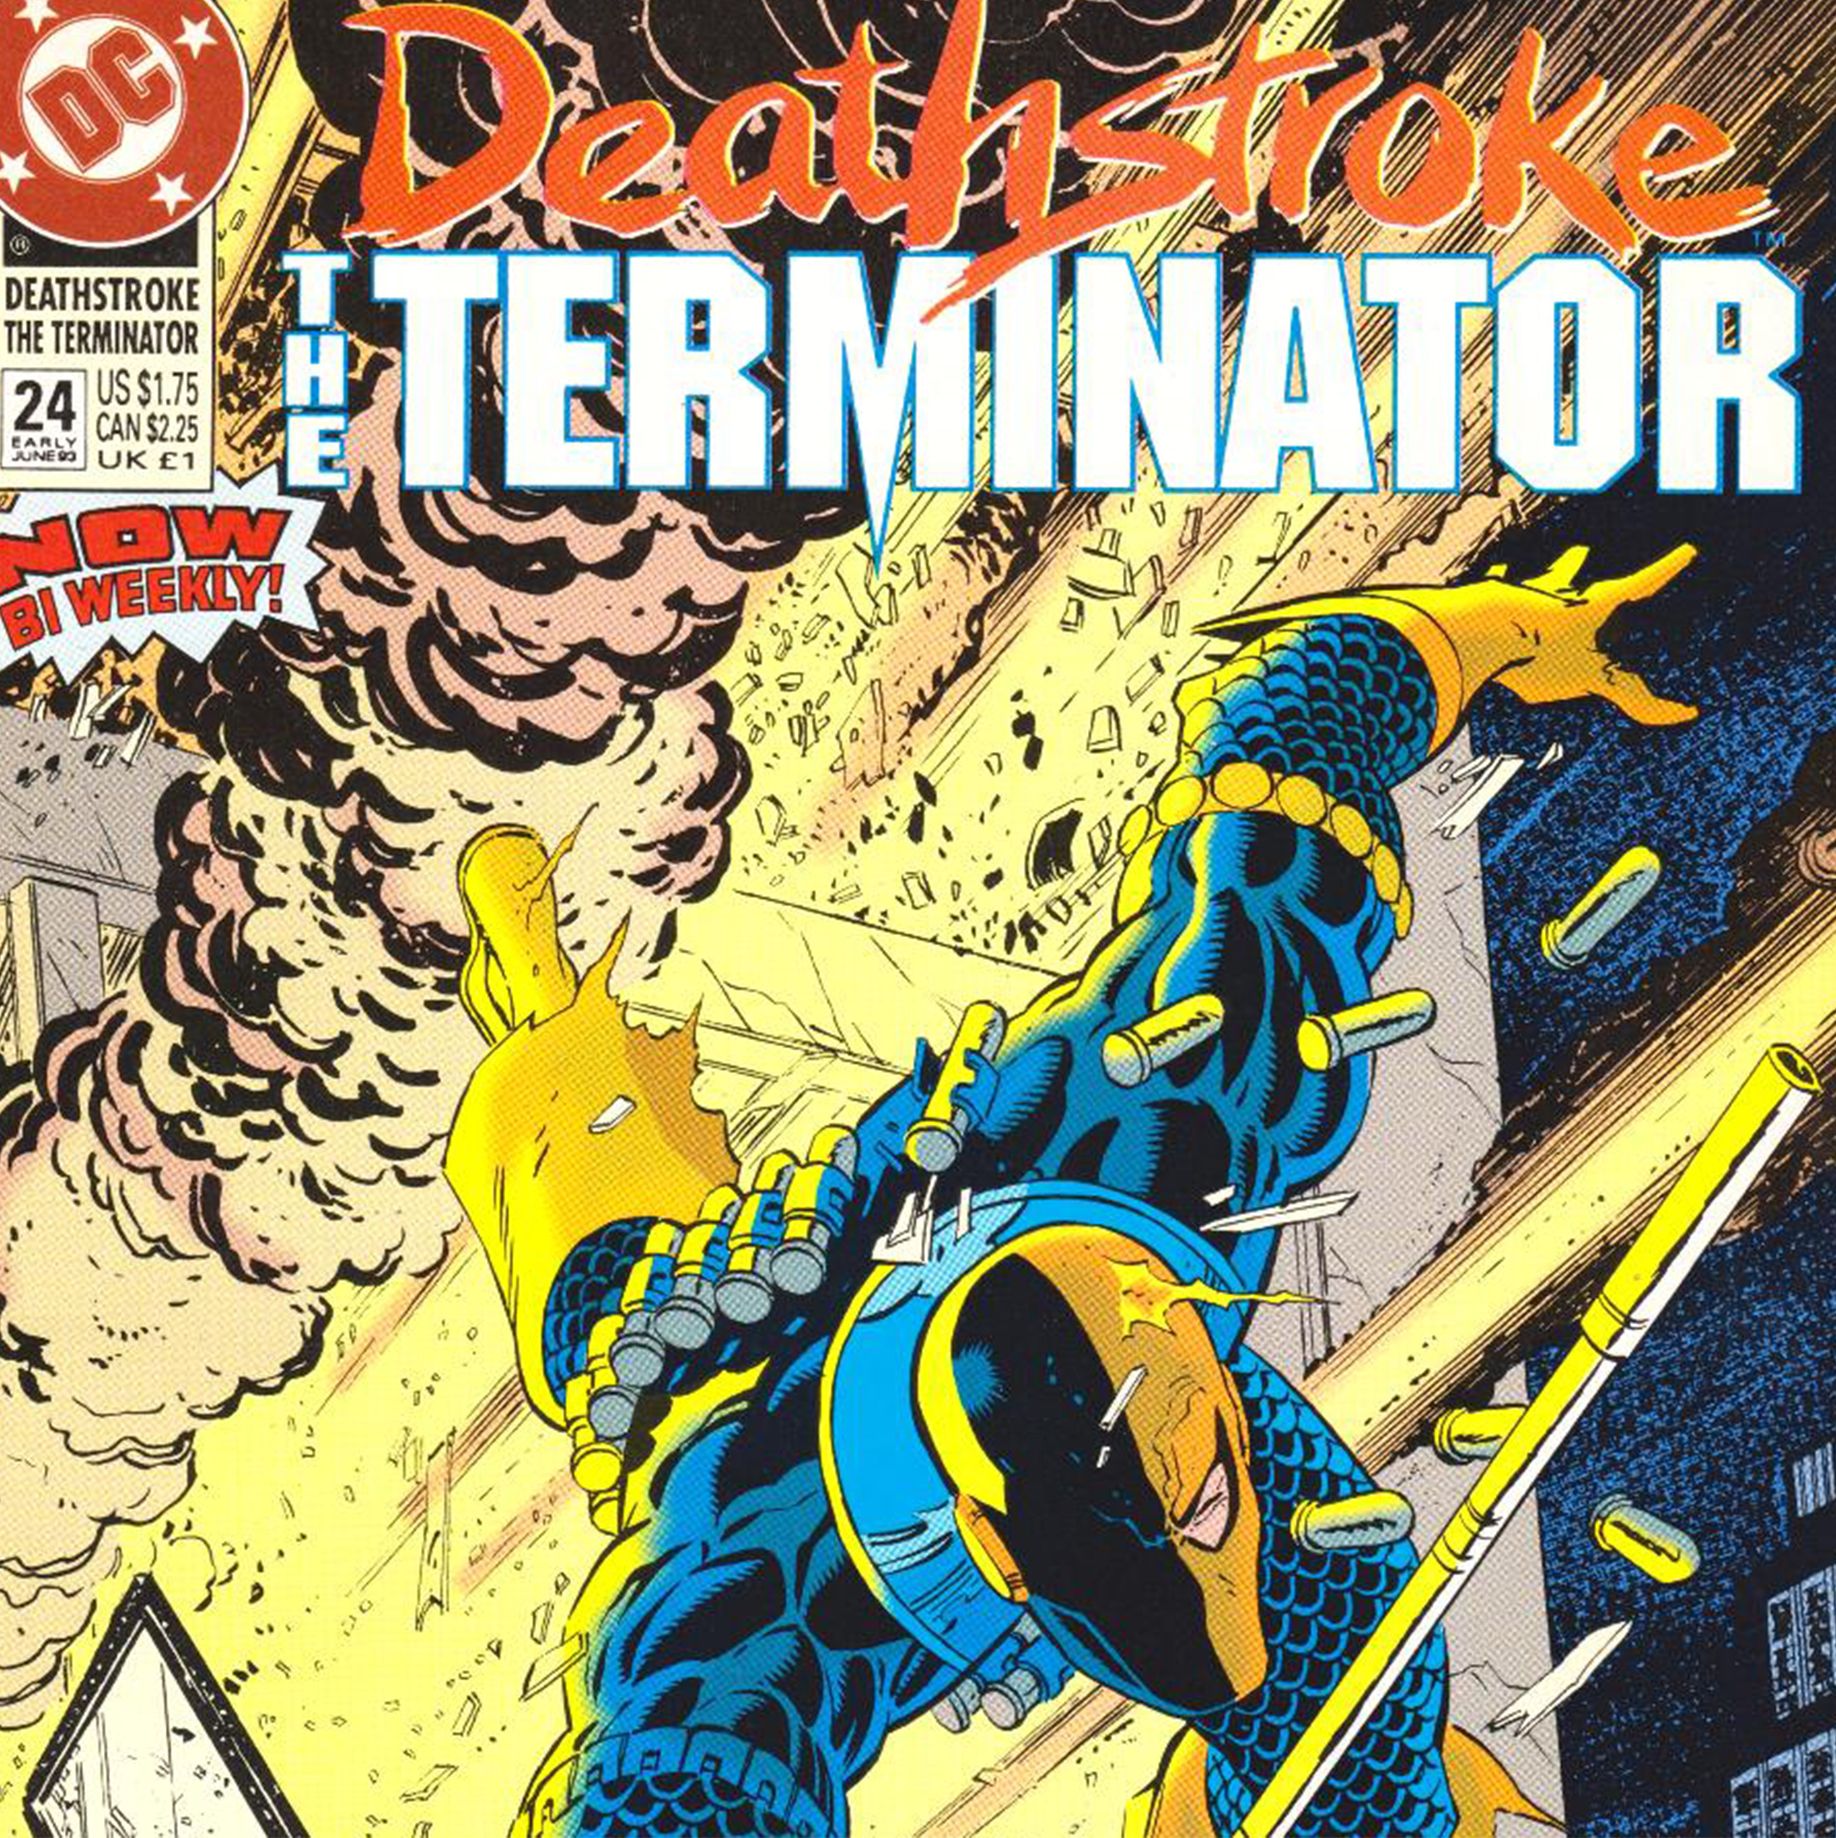 The Terminator Forced DC To Change Deathstroke’s Name